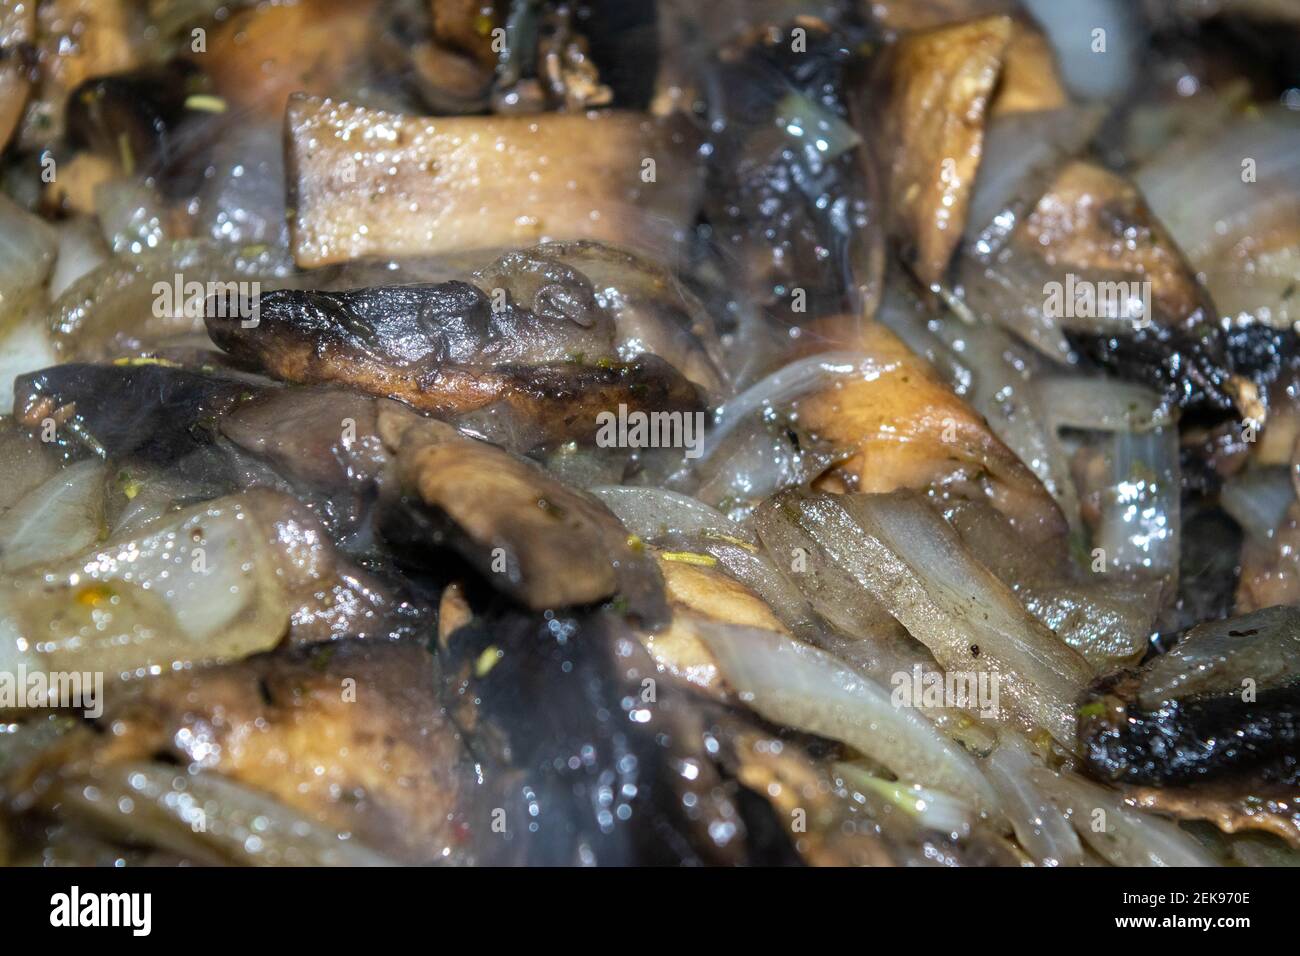 Wild mushrooms with onions are fried in a frying pan. Autumn harvest. Close-up, selective focus, surface texture. Stock Photo